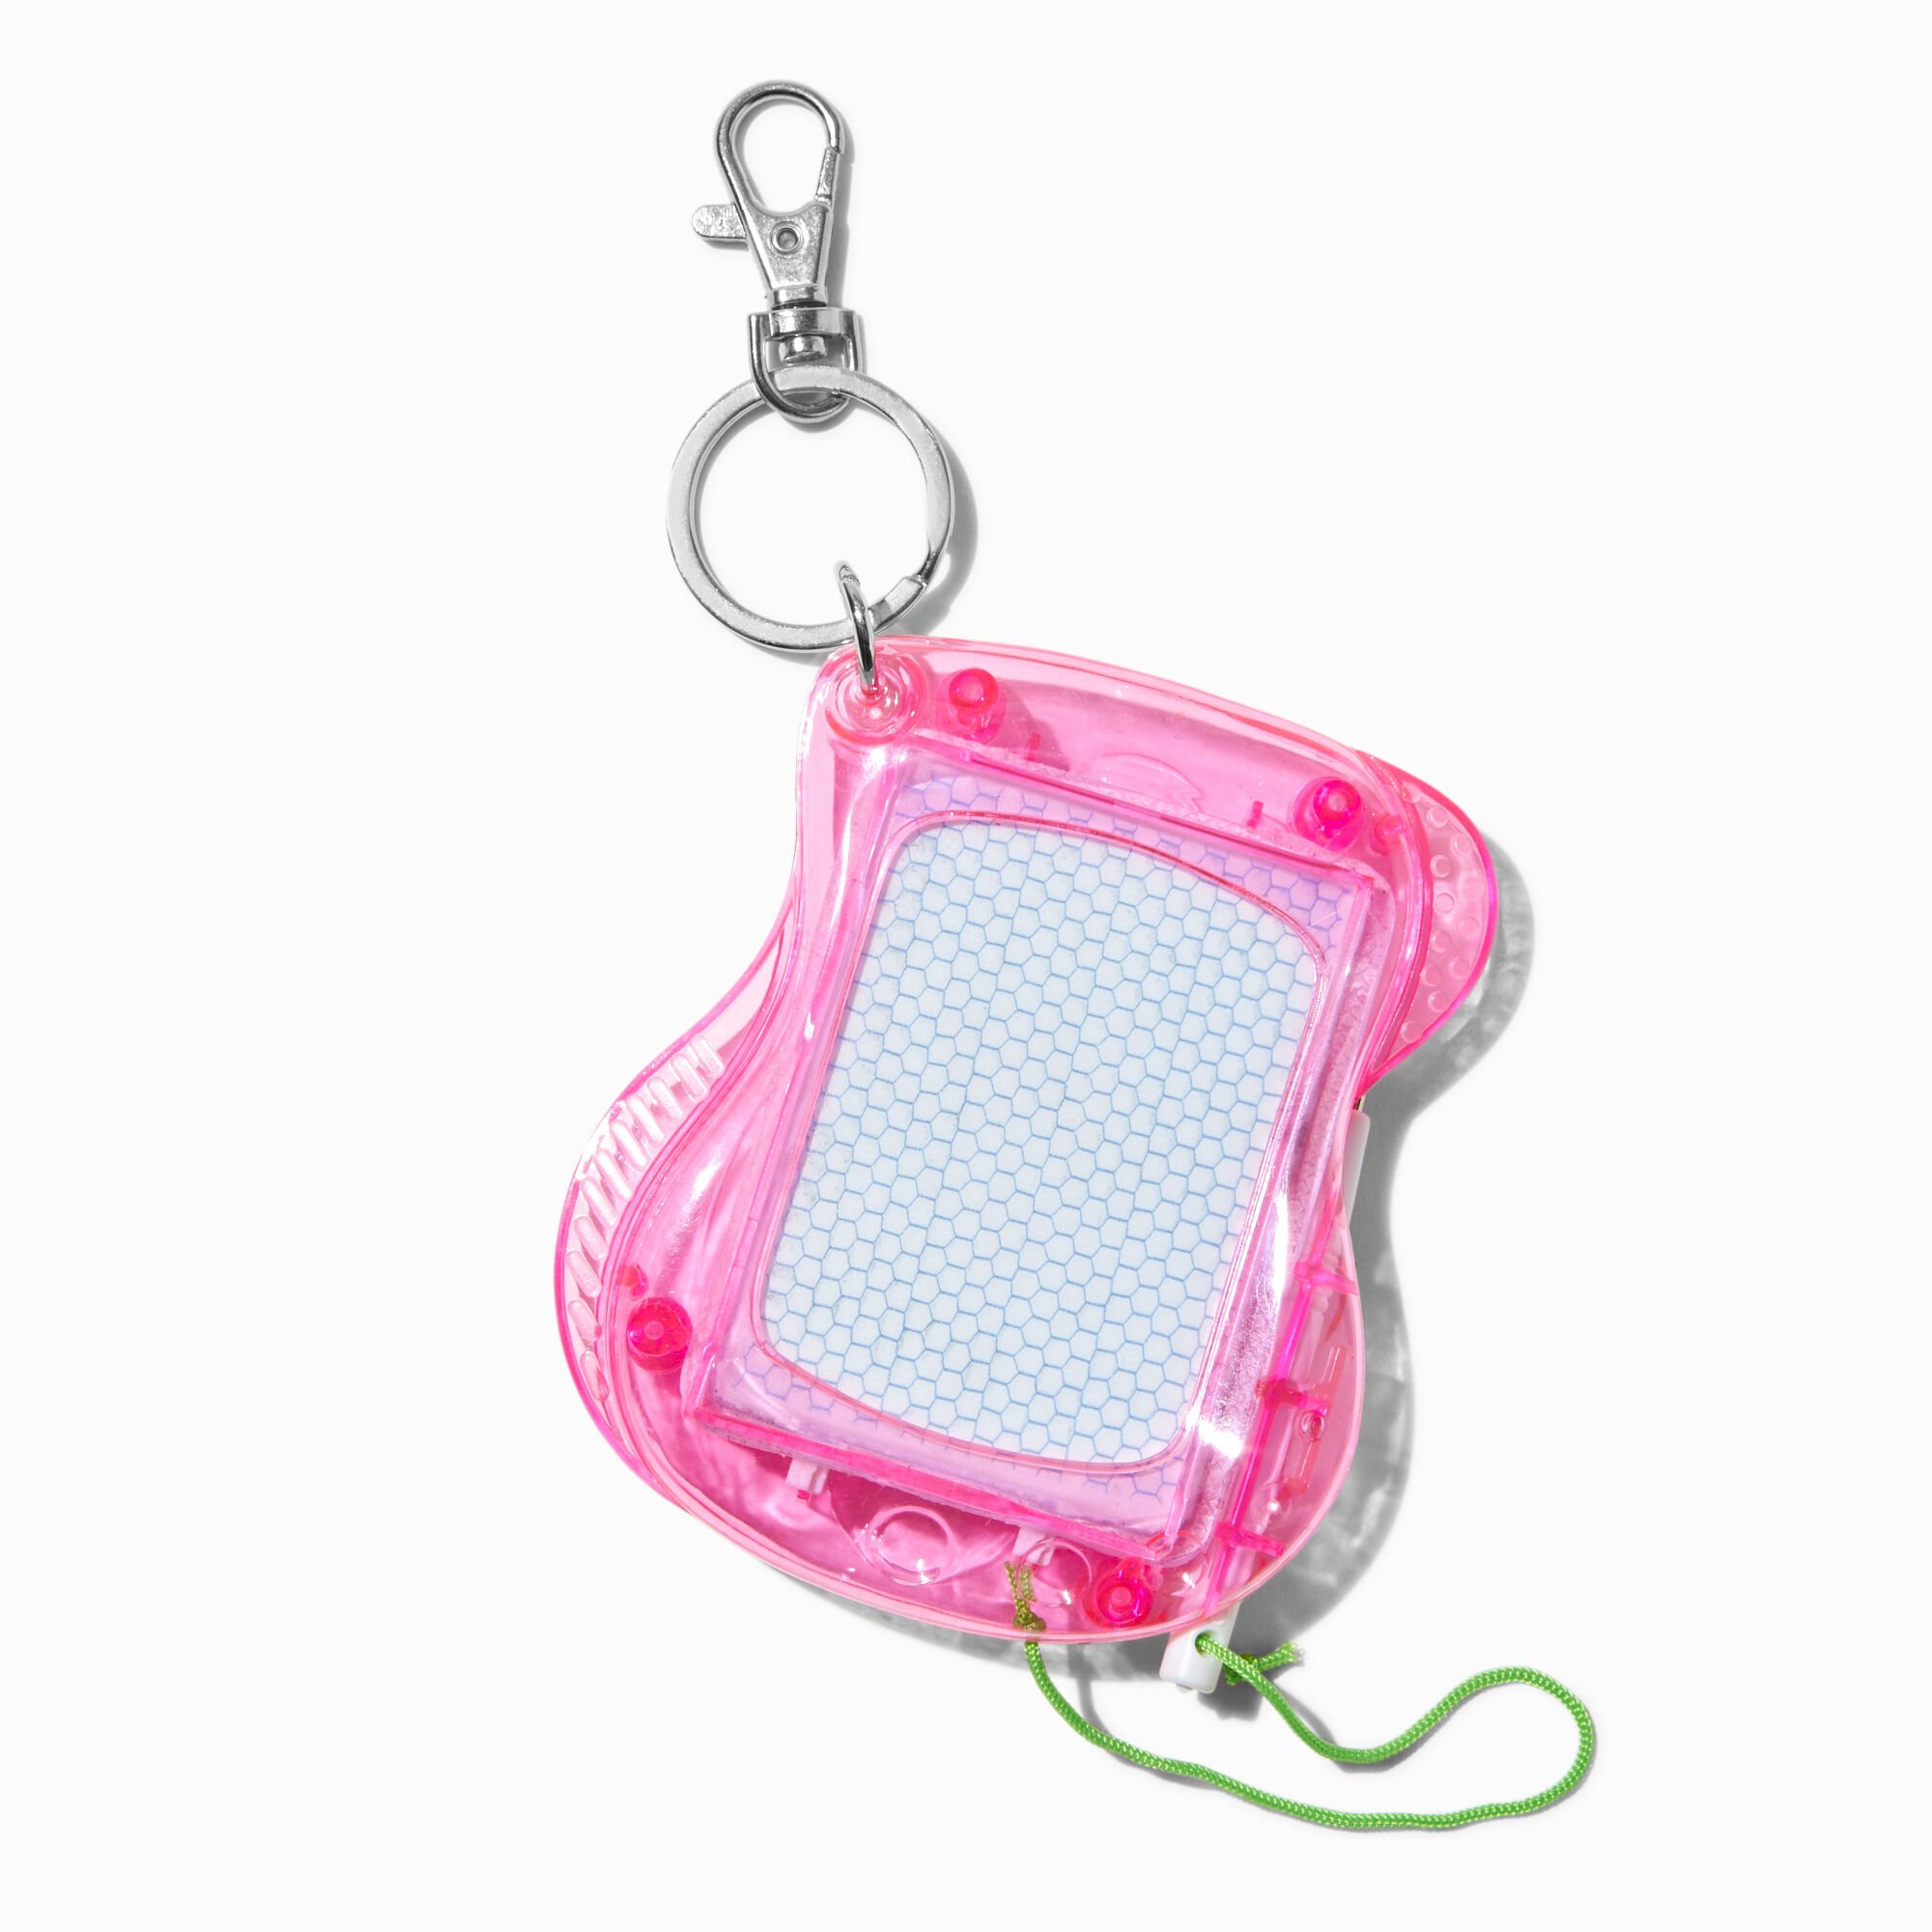 View Claires Sketch Toy Game Keychain information